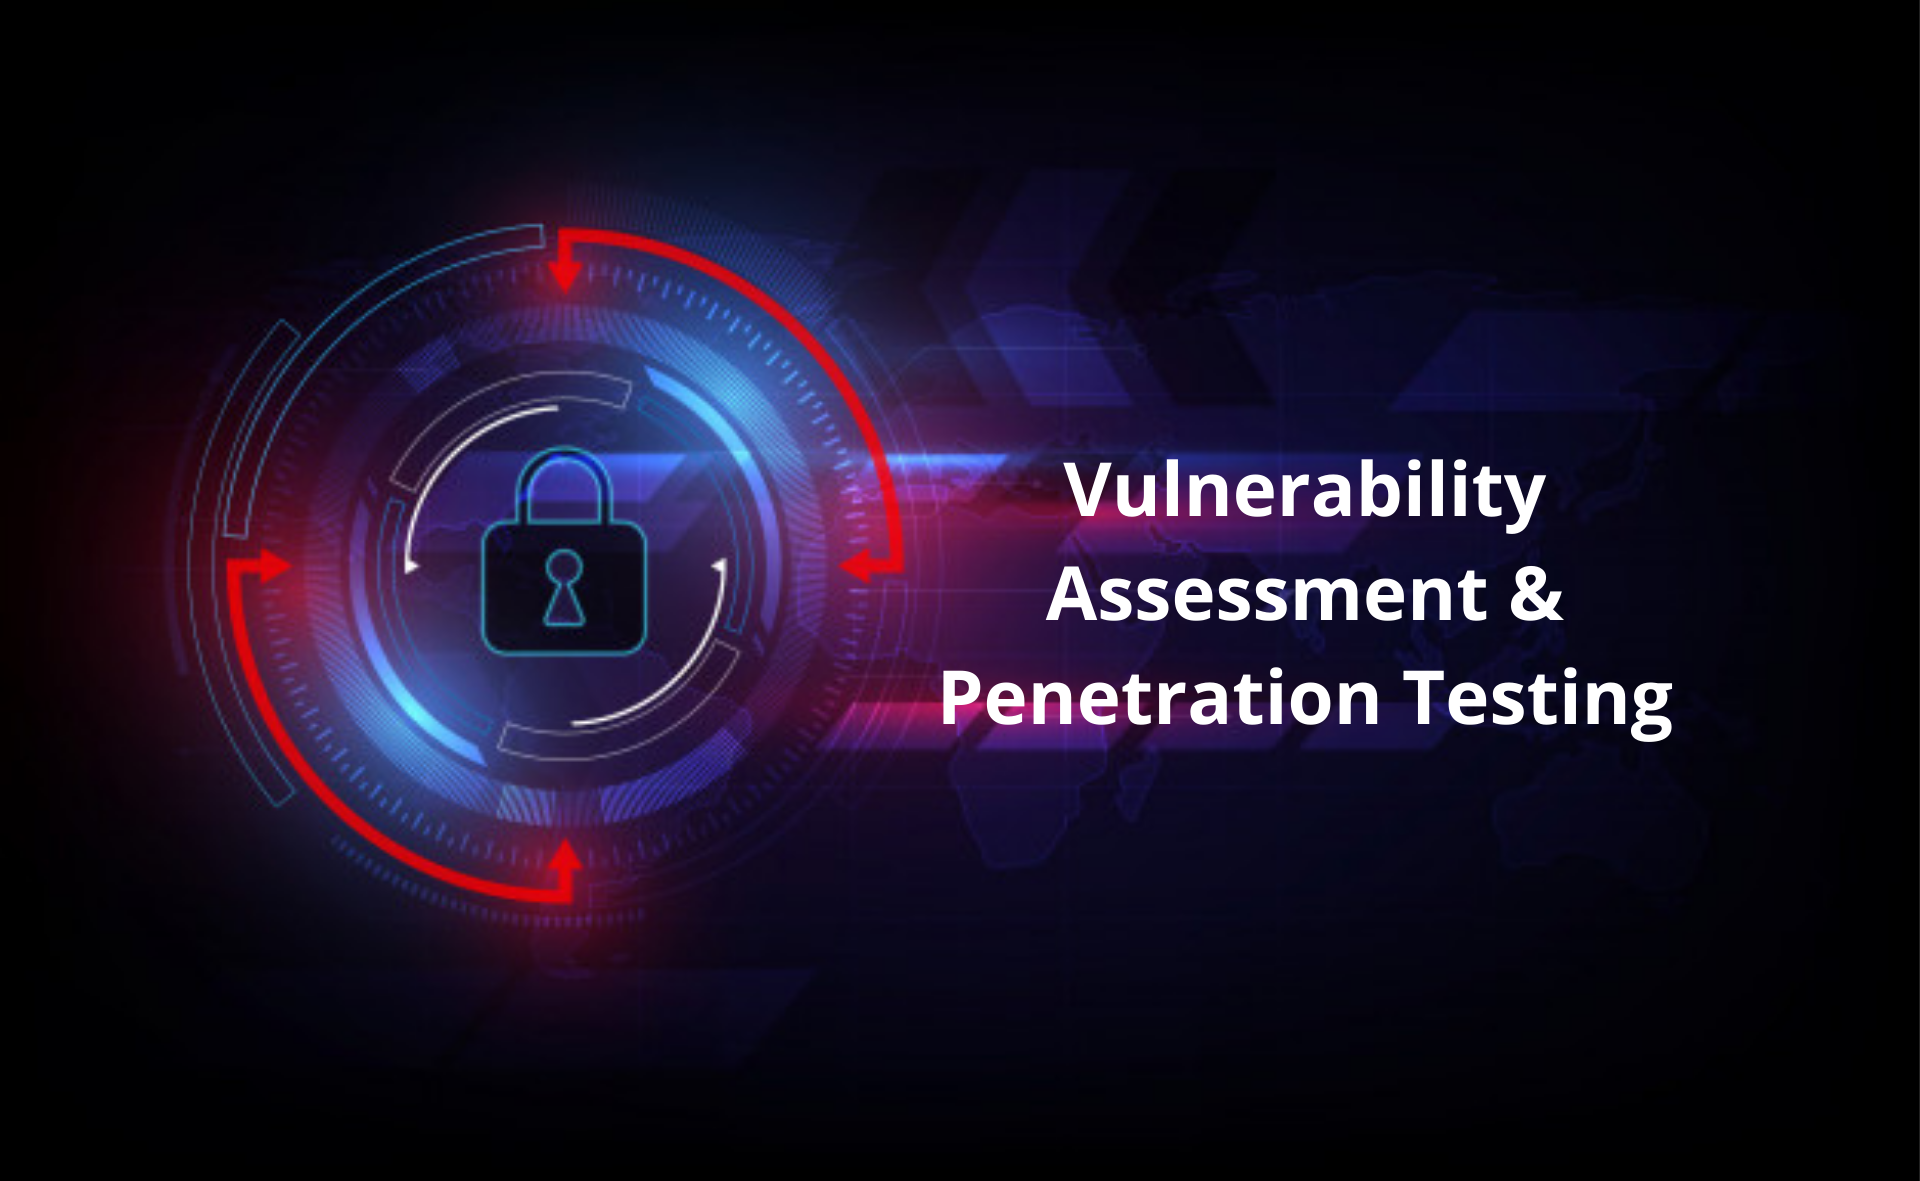 a comprehensive literature review of penetration testing & its applications